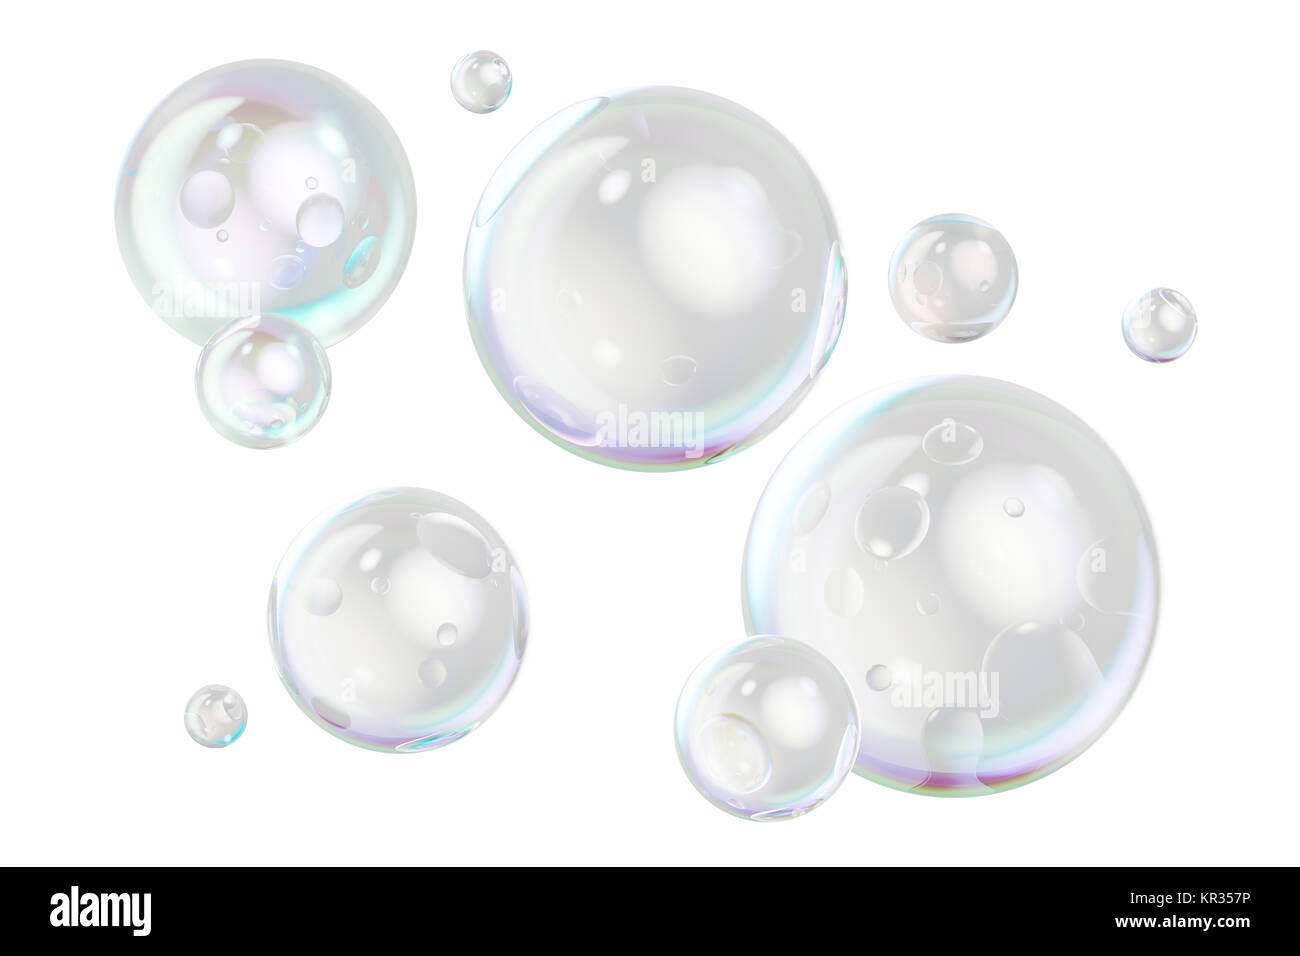 Soap bubbles, 3D rendering isolated on white background Stock Photo